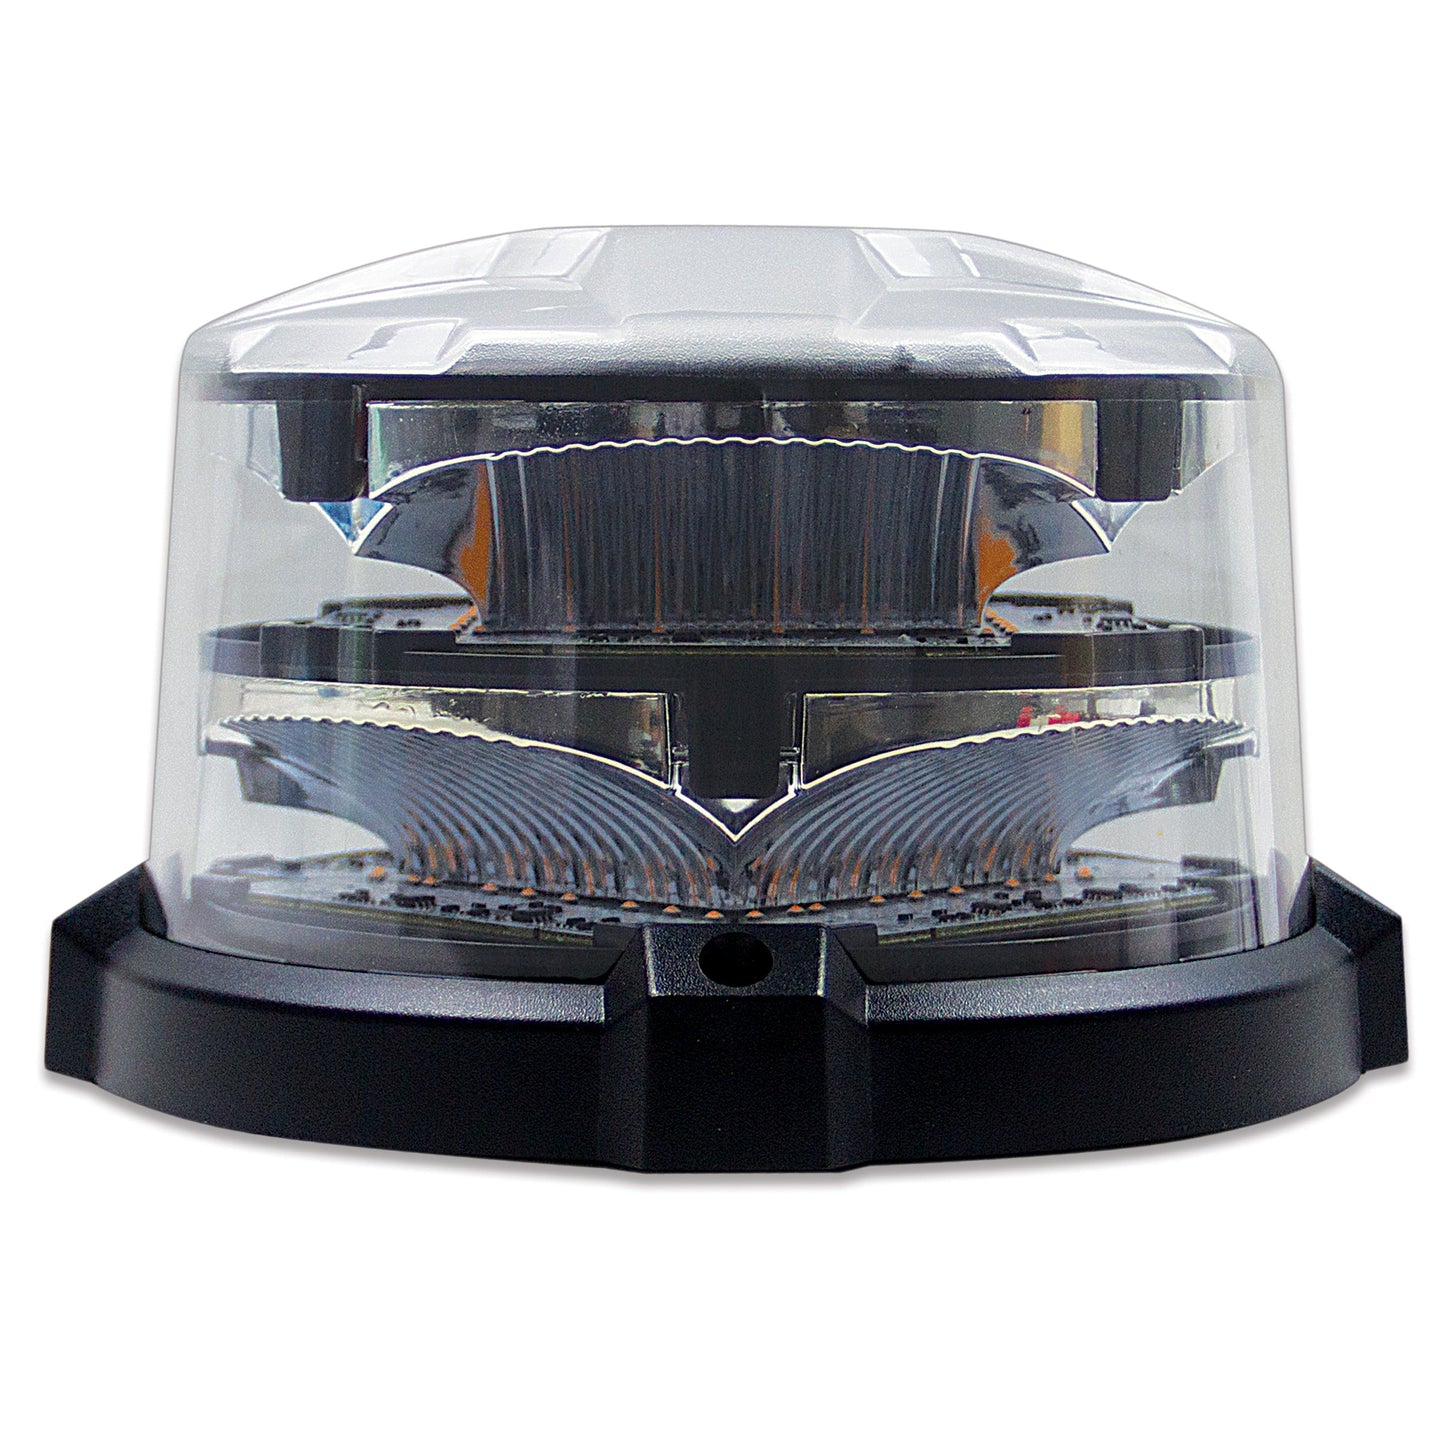 Soundoff Signal PNRBCDMHC High Dome For Nroads® Beacons - Clear